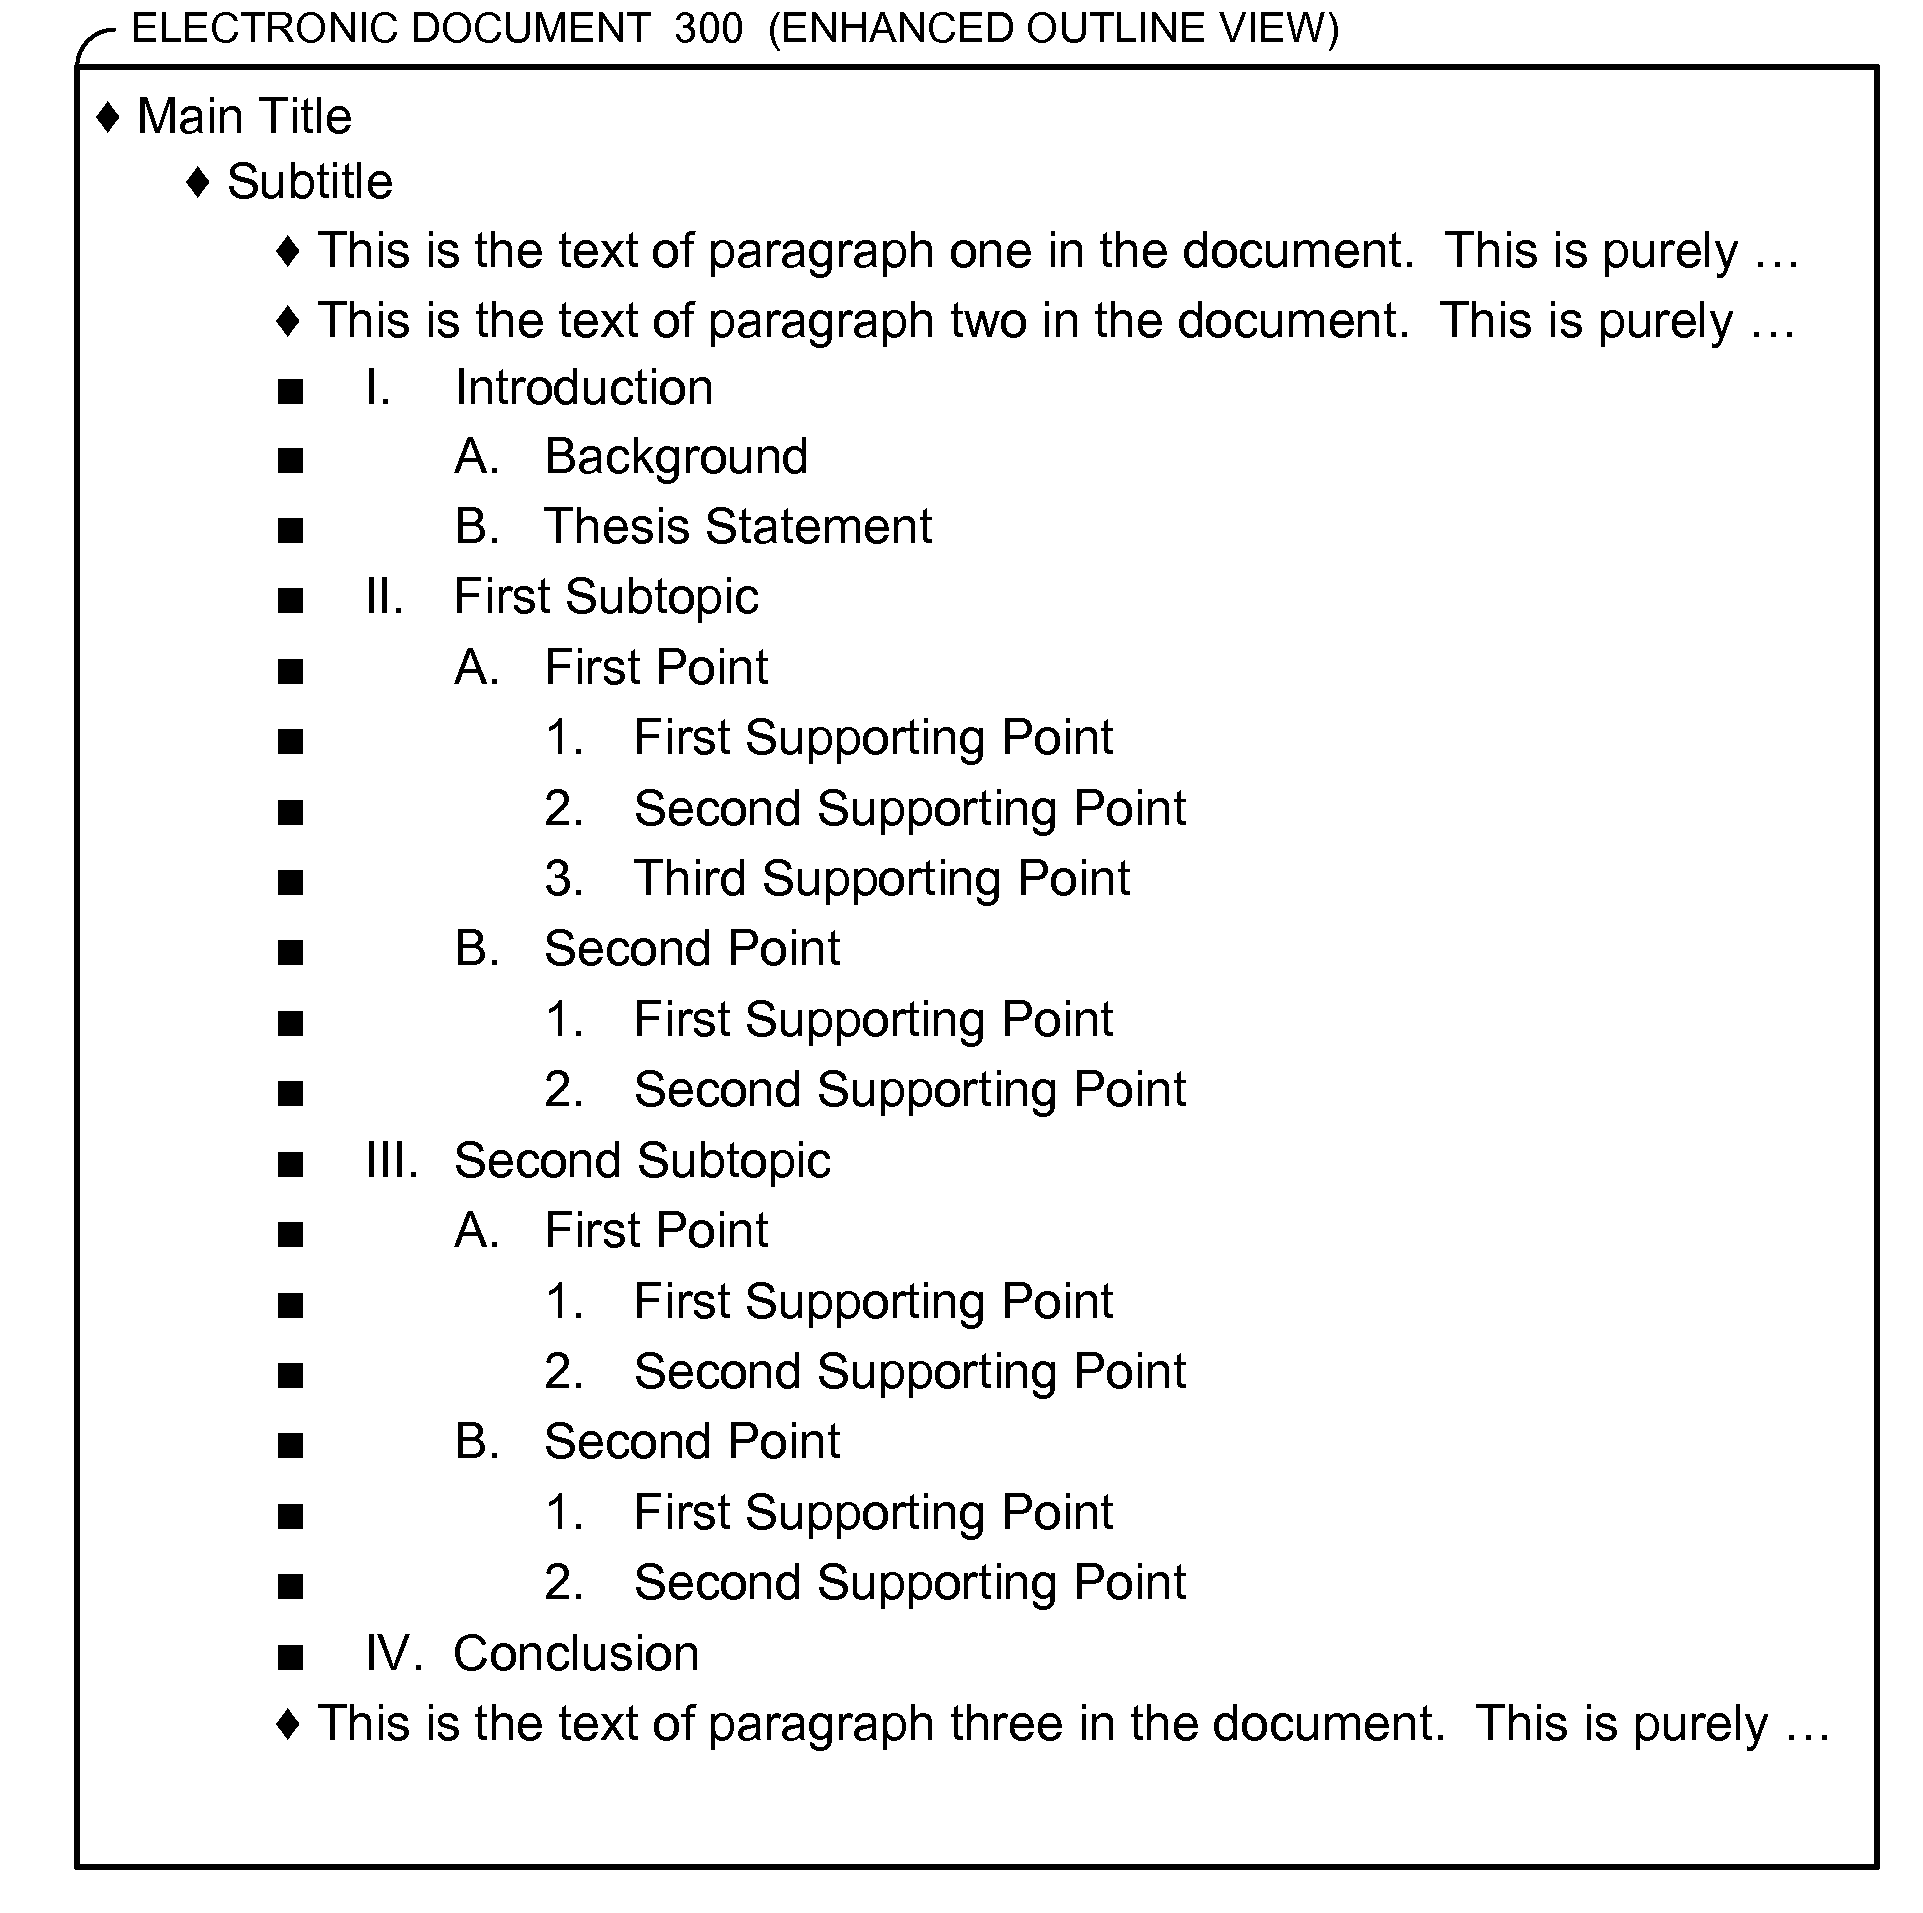 Preserving the structure of a list in a document while displaying an outline view of the document